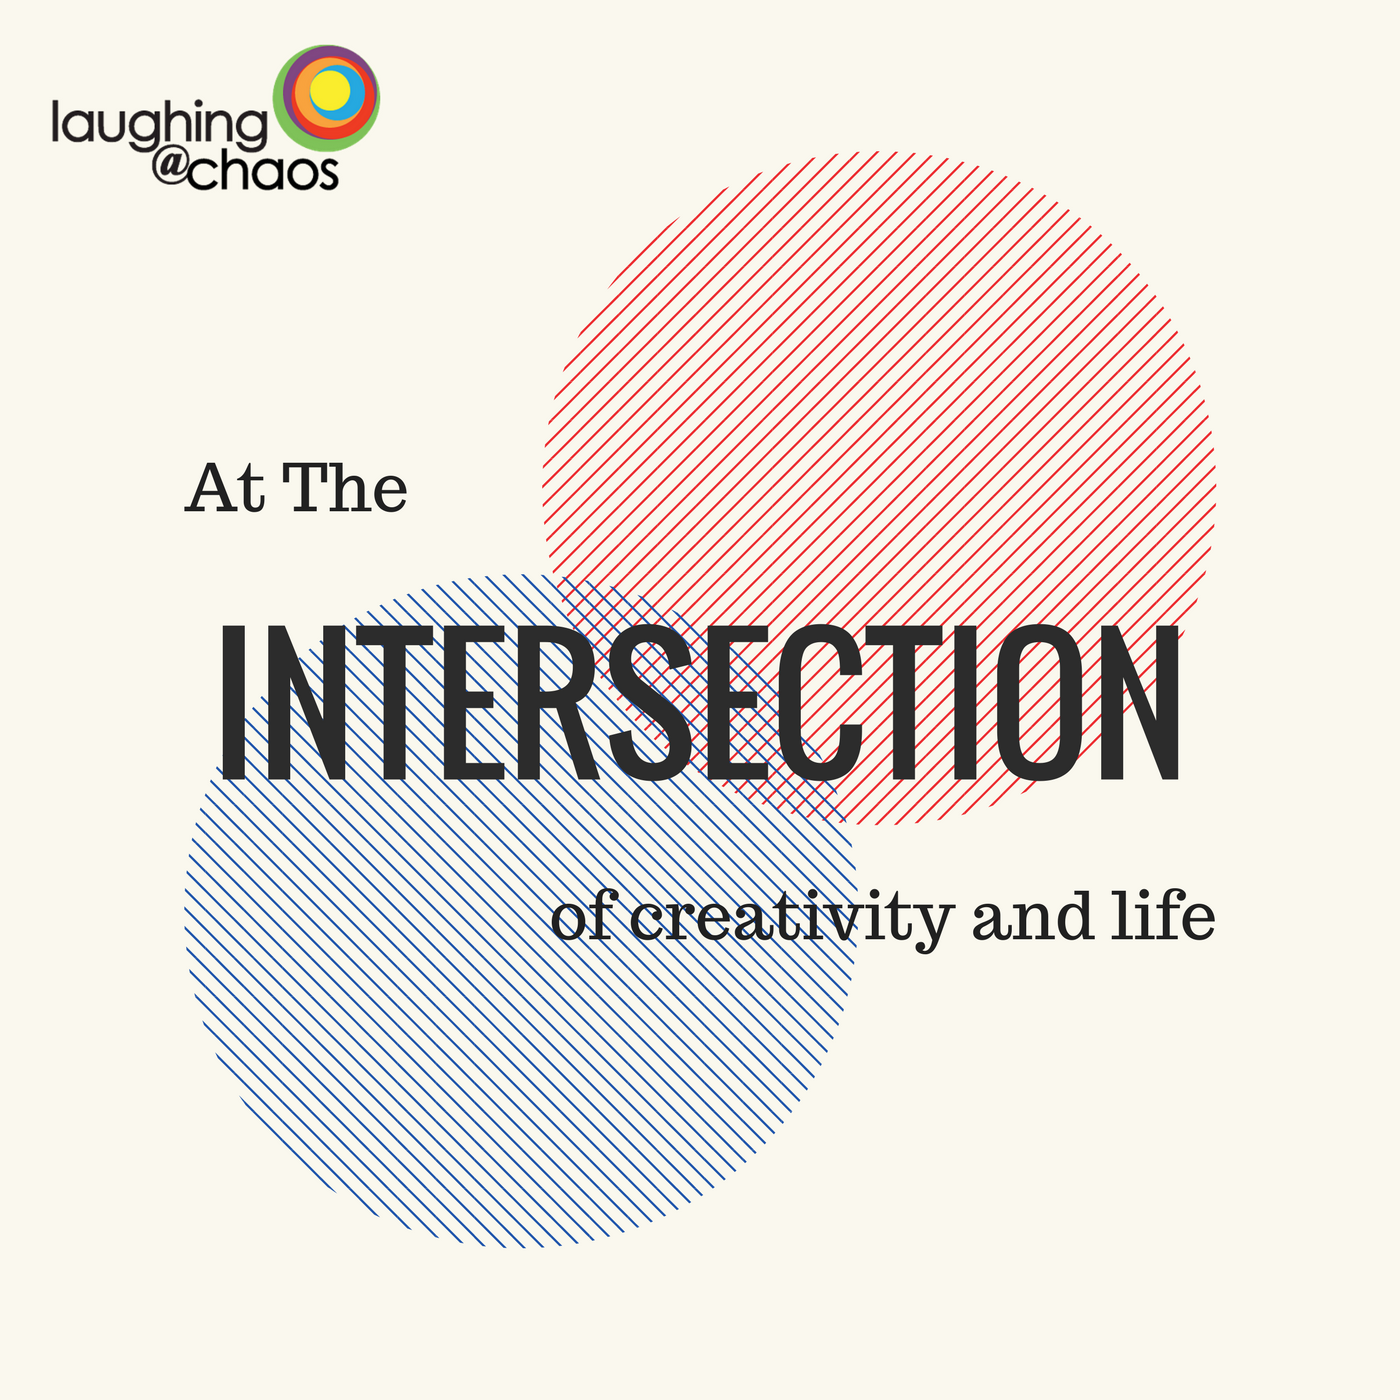 At the intersection of creativity and life